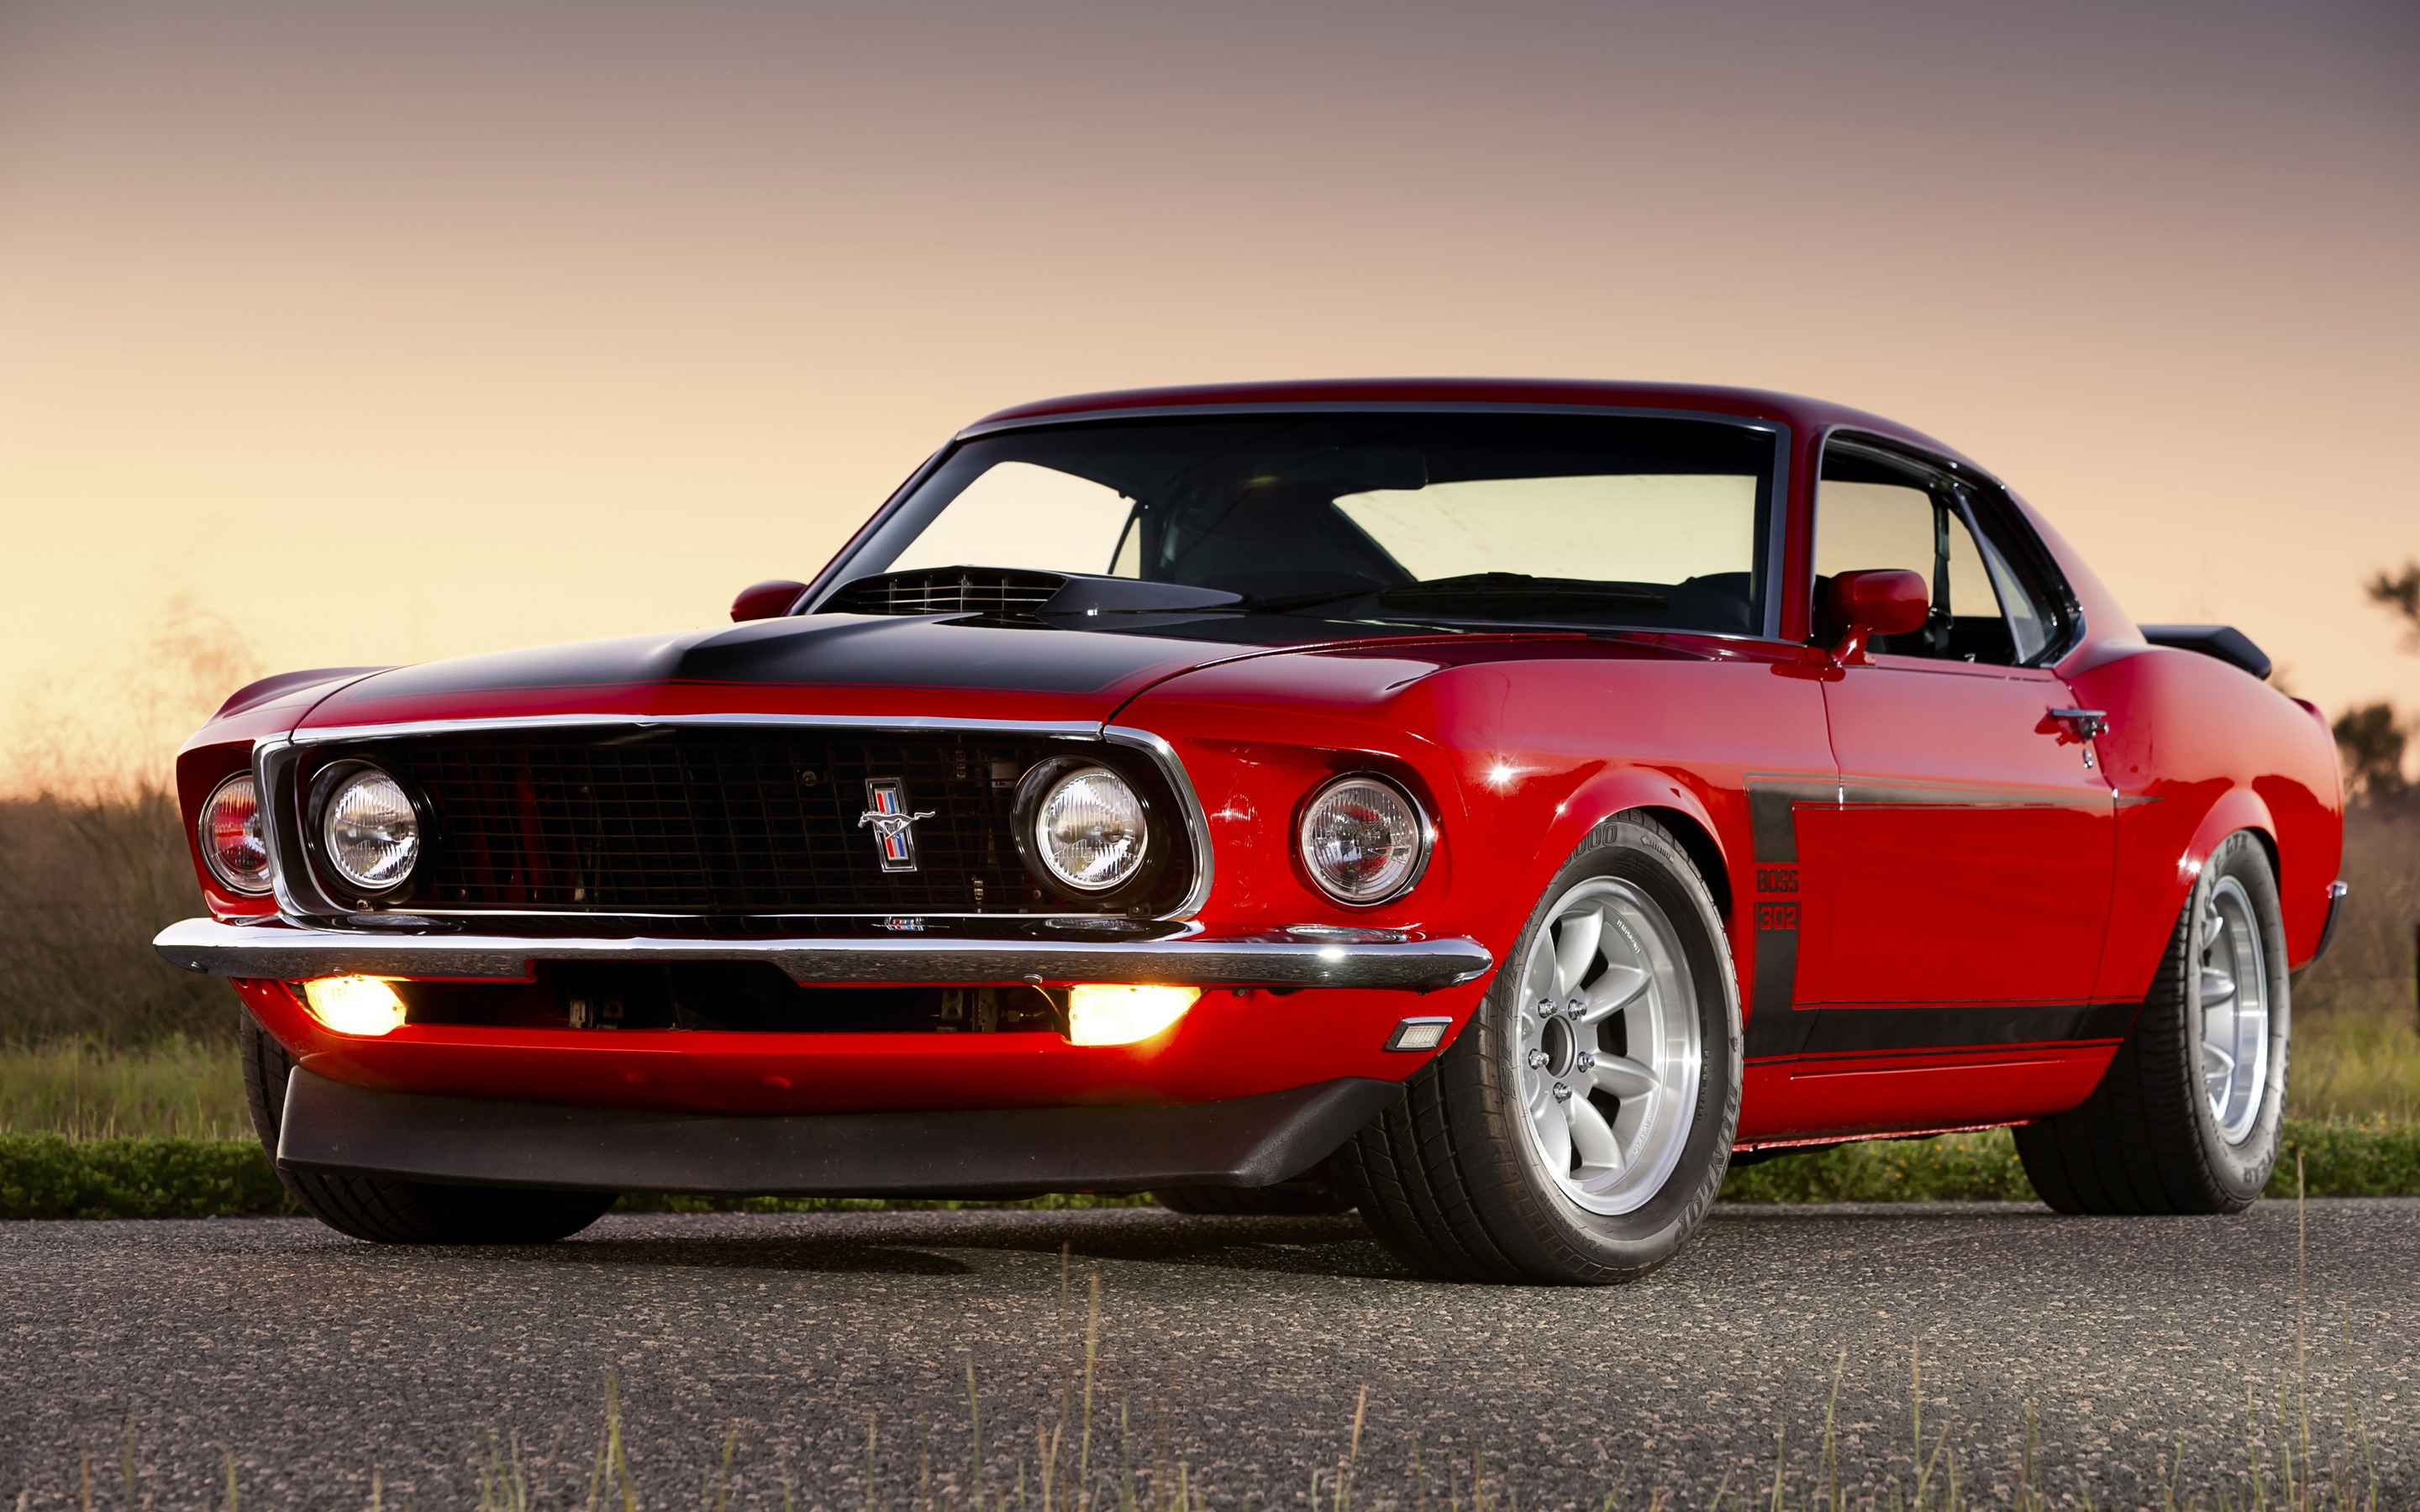 1969 Ford Mustang Mach 1 muscle classic f wallpaper  2048x1536  117834   WallpaperUP